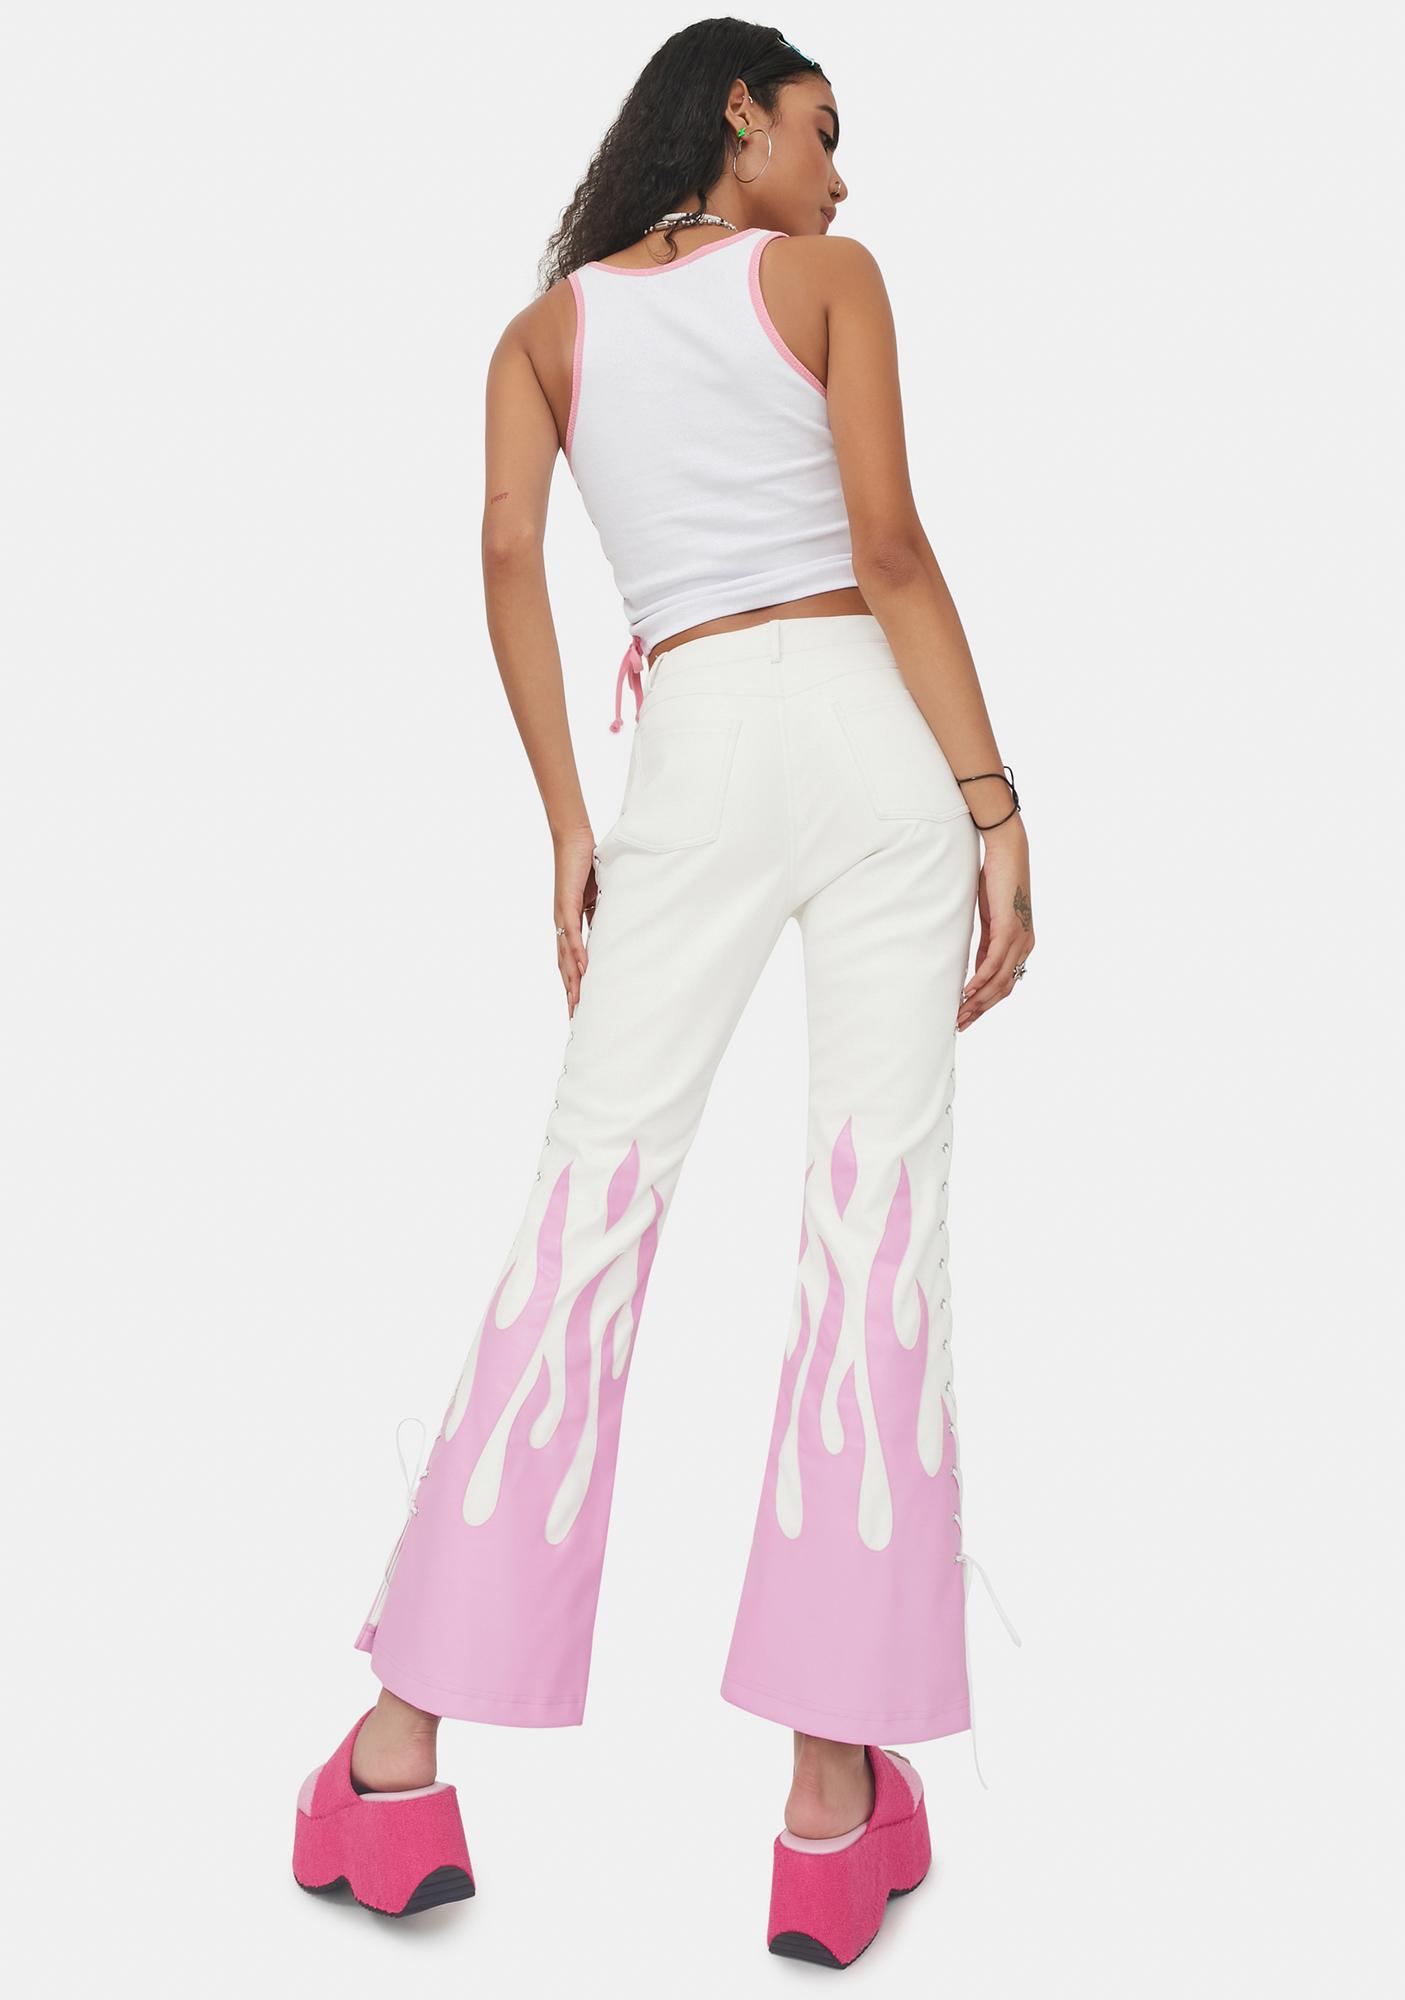 Delia's Vegan Leather Flame Lace Up Flare Pants - White/Pink | Dolls Kill